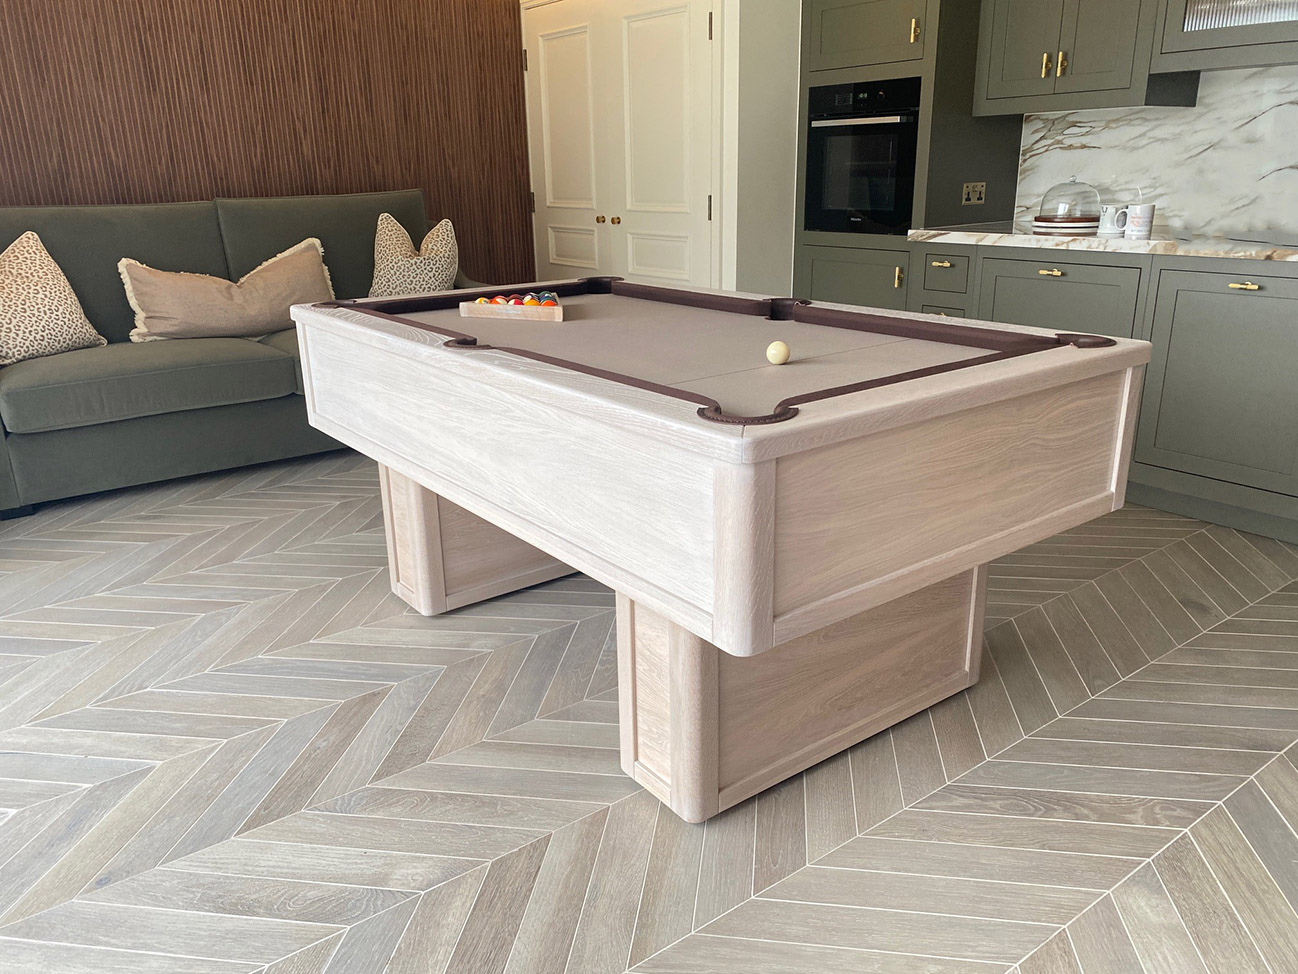 Emperor English Pool Table with Pedestal Legs